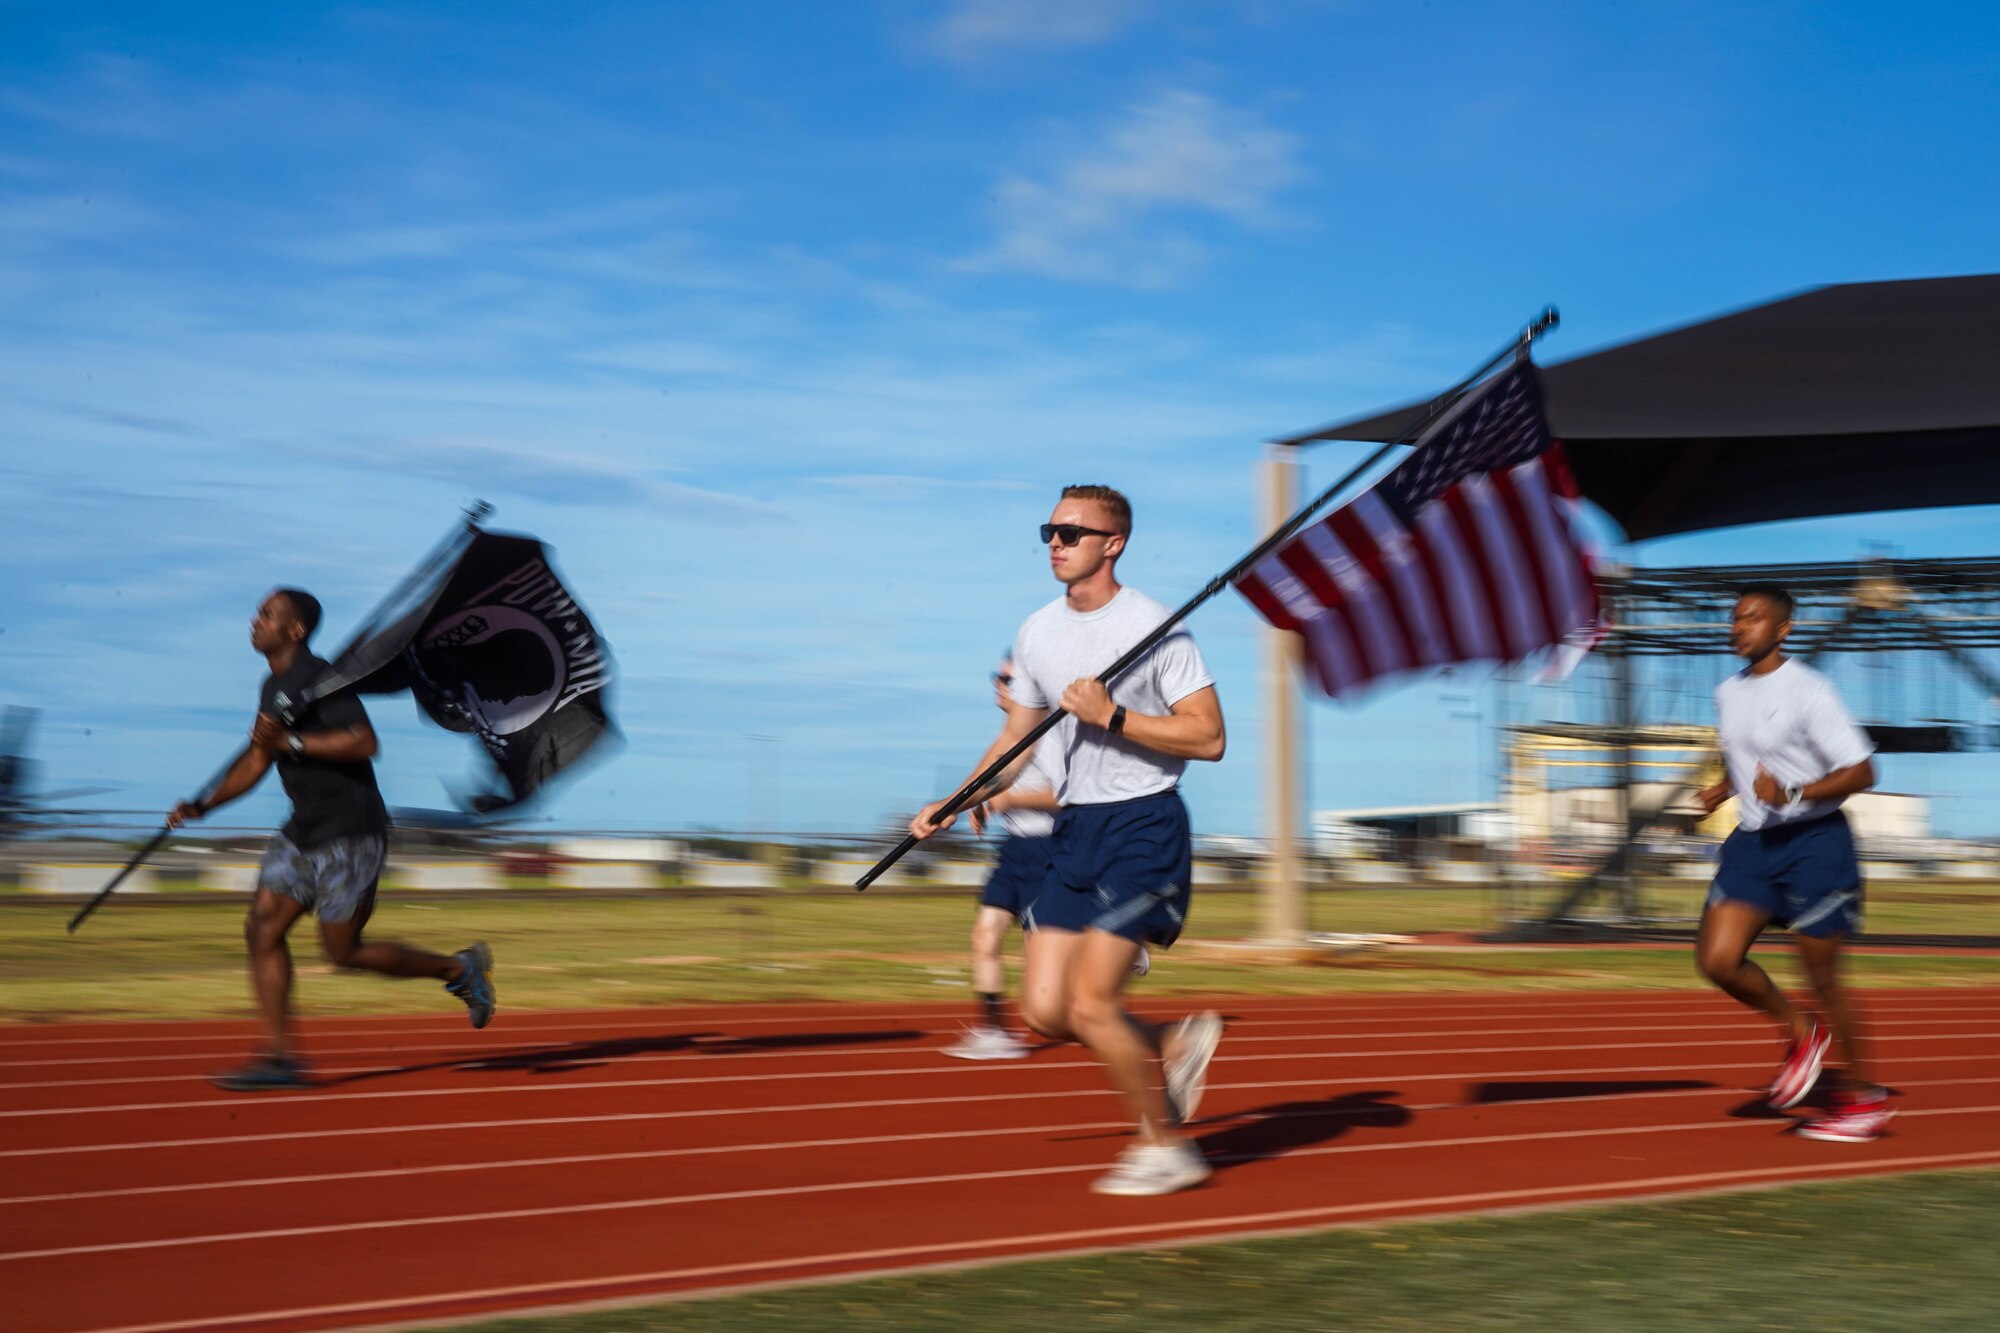 Airmen from 674th Airbase Group participate in a 24-hour run in honor of Prisoners of War and Missing in Action Remembrance Week at Joint Base Pearl Harbor-Hickam, Hawaii, Sept. 16, 2021. During the run, the POW/MIA flag will stay in motion for 24 hours by volunteers running with the flag to commemorate and symbolize the unwavering pursuit to recover all service members past and present. (U.S. Air Force photo by Airman 1st Class Makensie Cooper)